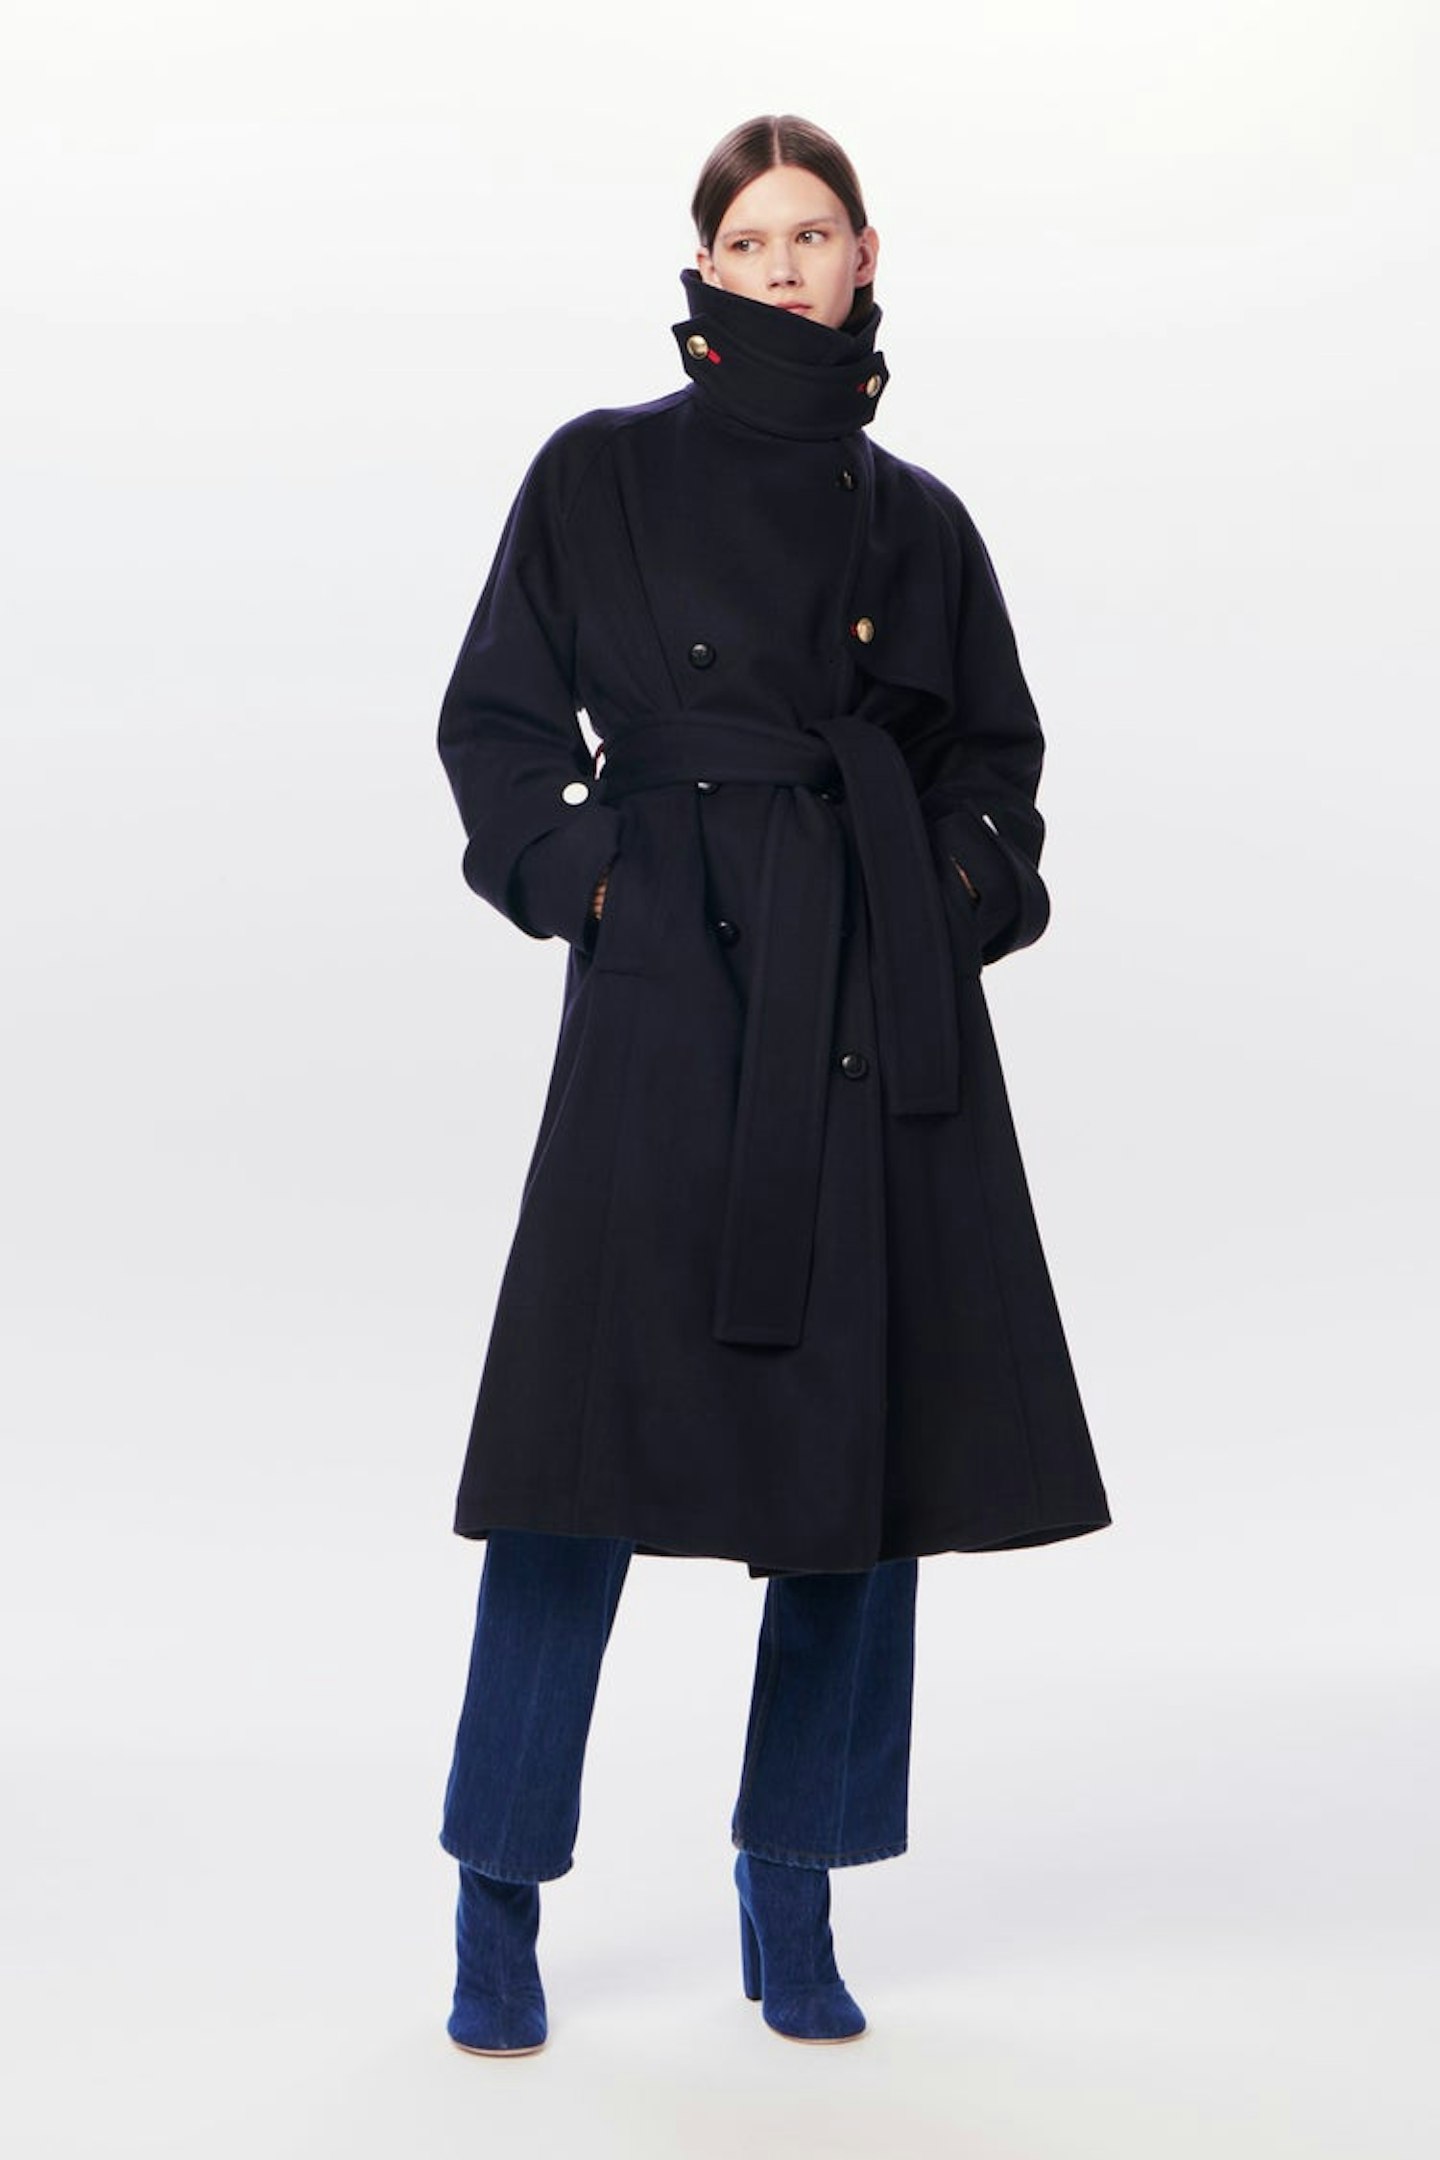 Victoria Beckham, Funnel Collar Trench Coat, WAS £1,590 NOW £795